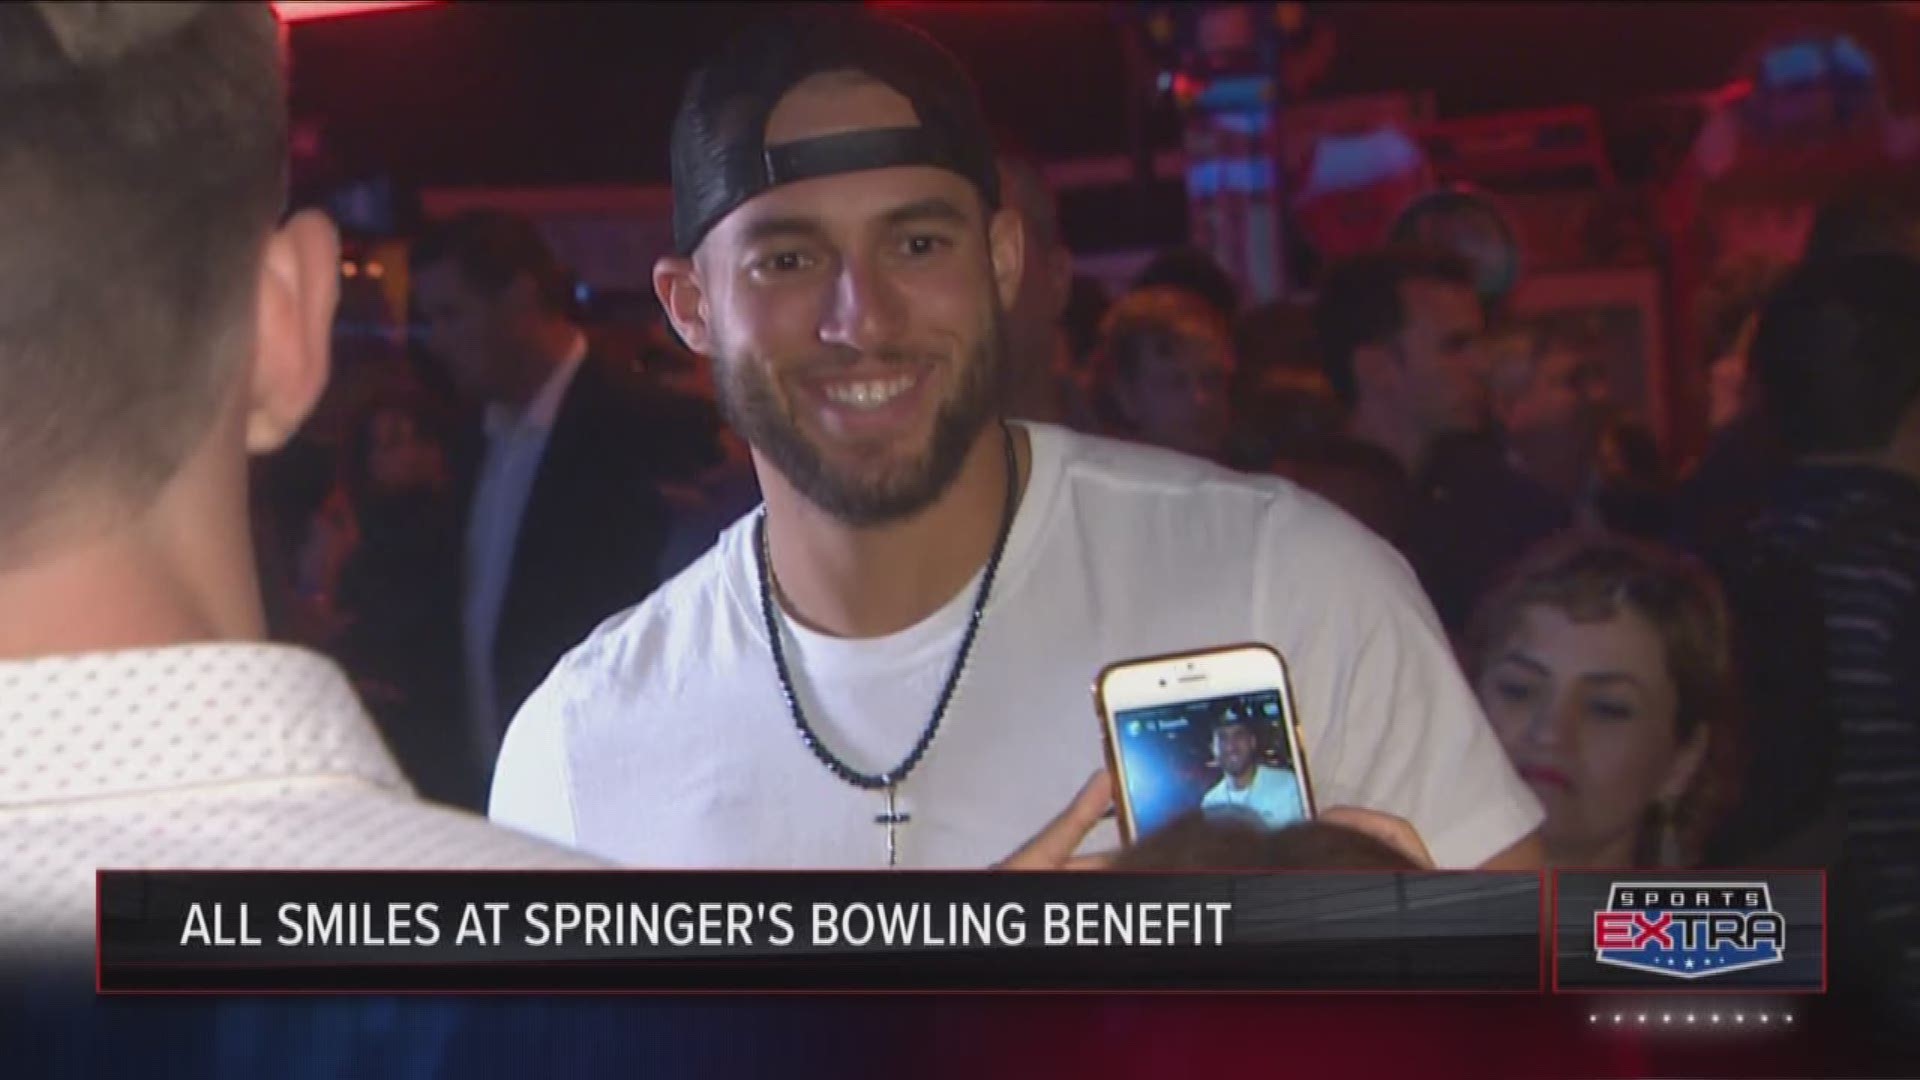 George Springer and some buddies hit the lanes at Bowl More Houston Sunday night for his 4th Annual All Star Bowling benefit. The money helps send kids and teens who live with a stutter to "Camp Say." It's described as a life-changing camp that helps youn